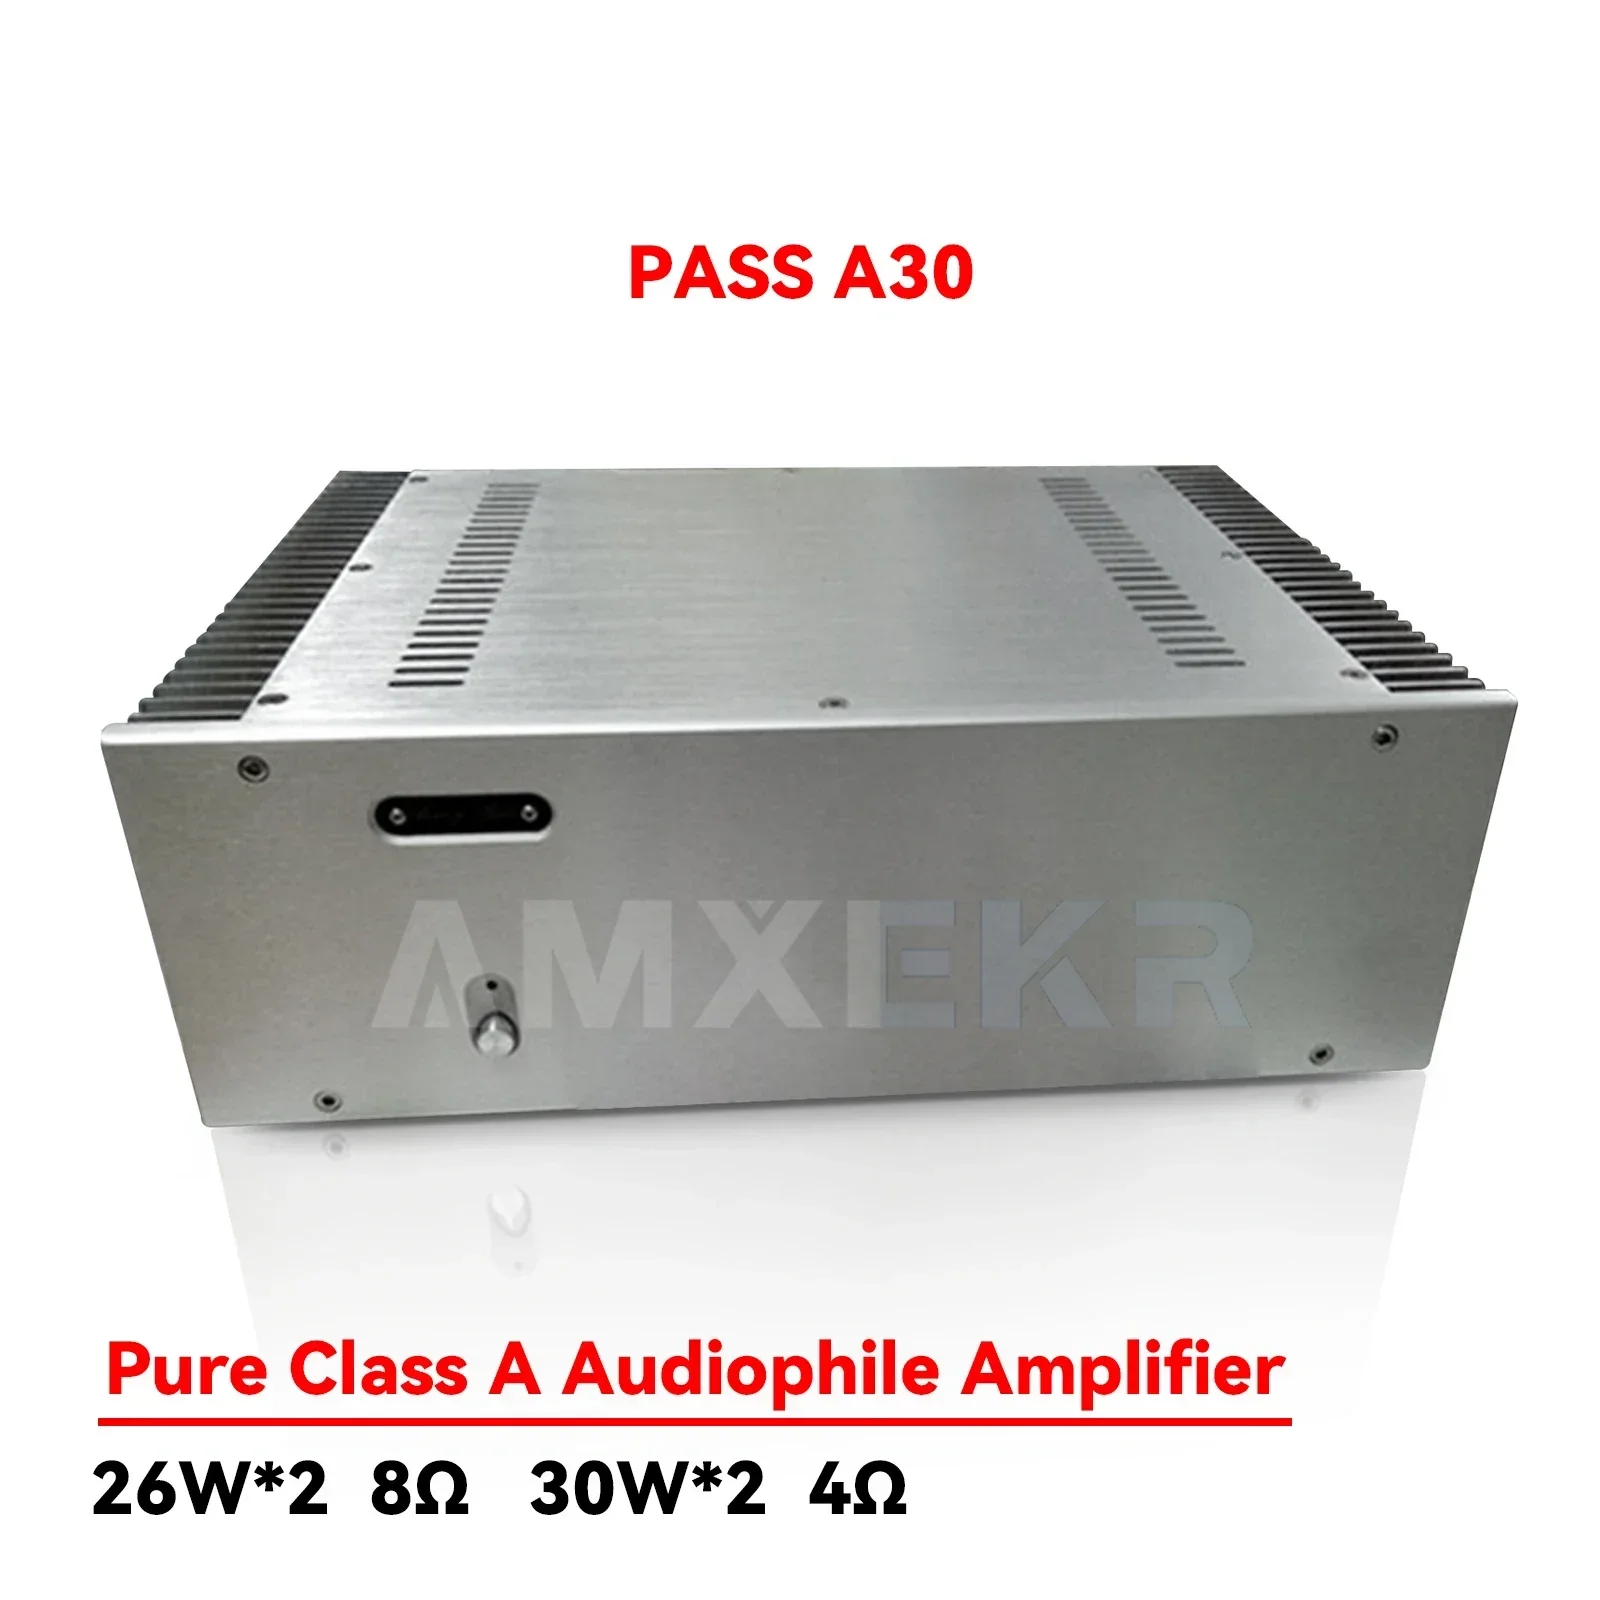 

AMXEKR 30w*2 Reference PASS A30 Class A Power Amplifier FET Sound Beautiful and Stable HIFI 2-channel Power Amplifier Audio